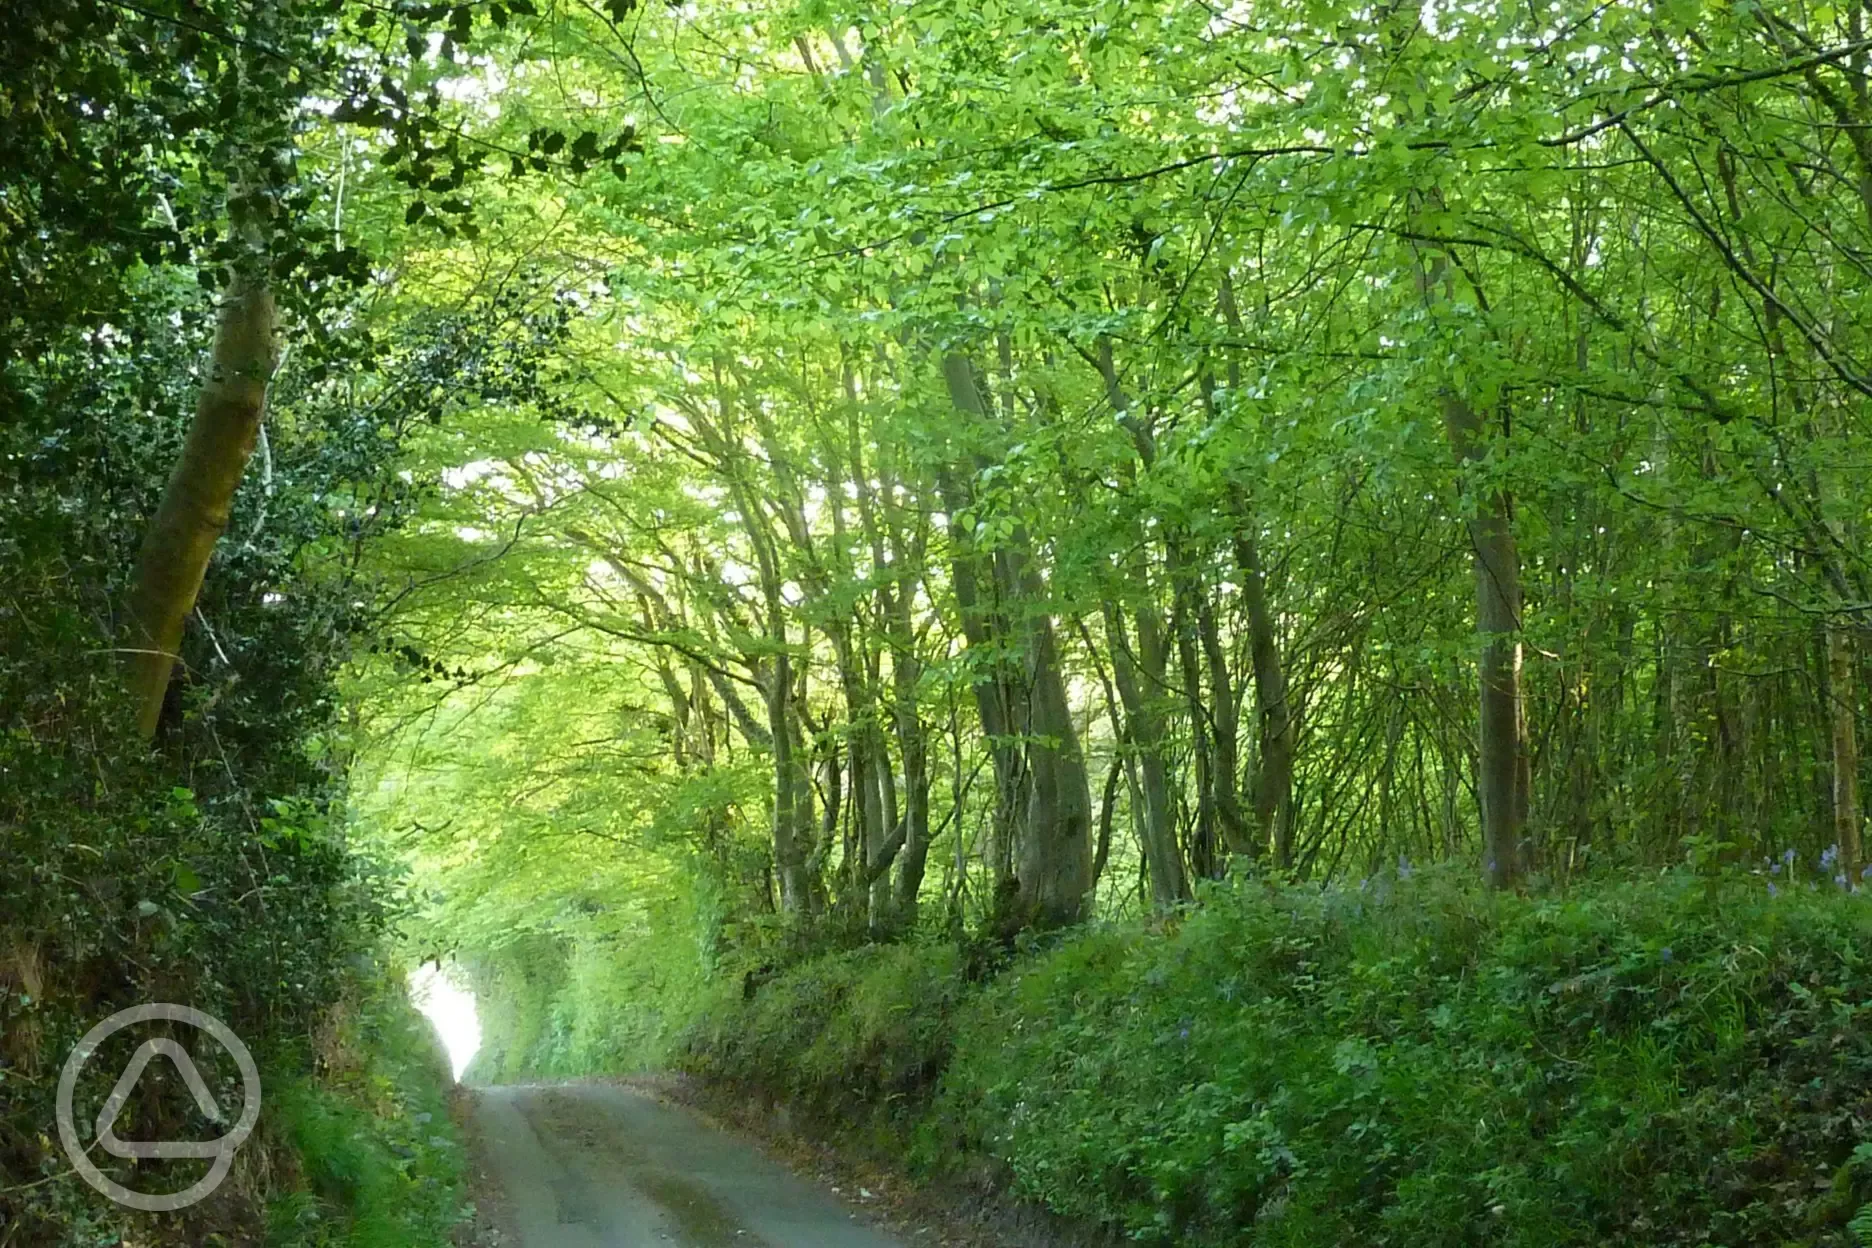 Pretty country lanes to explore by bike.